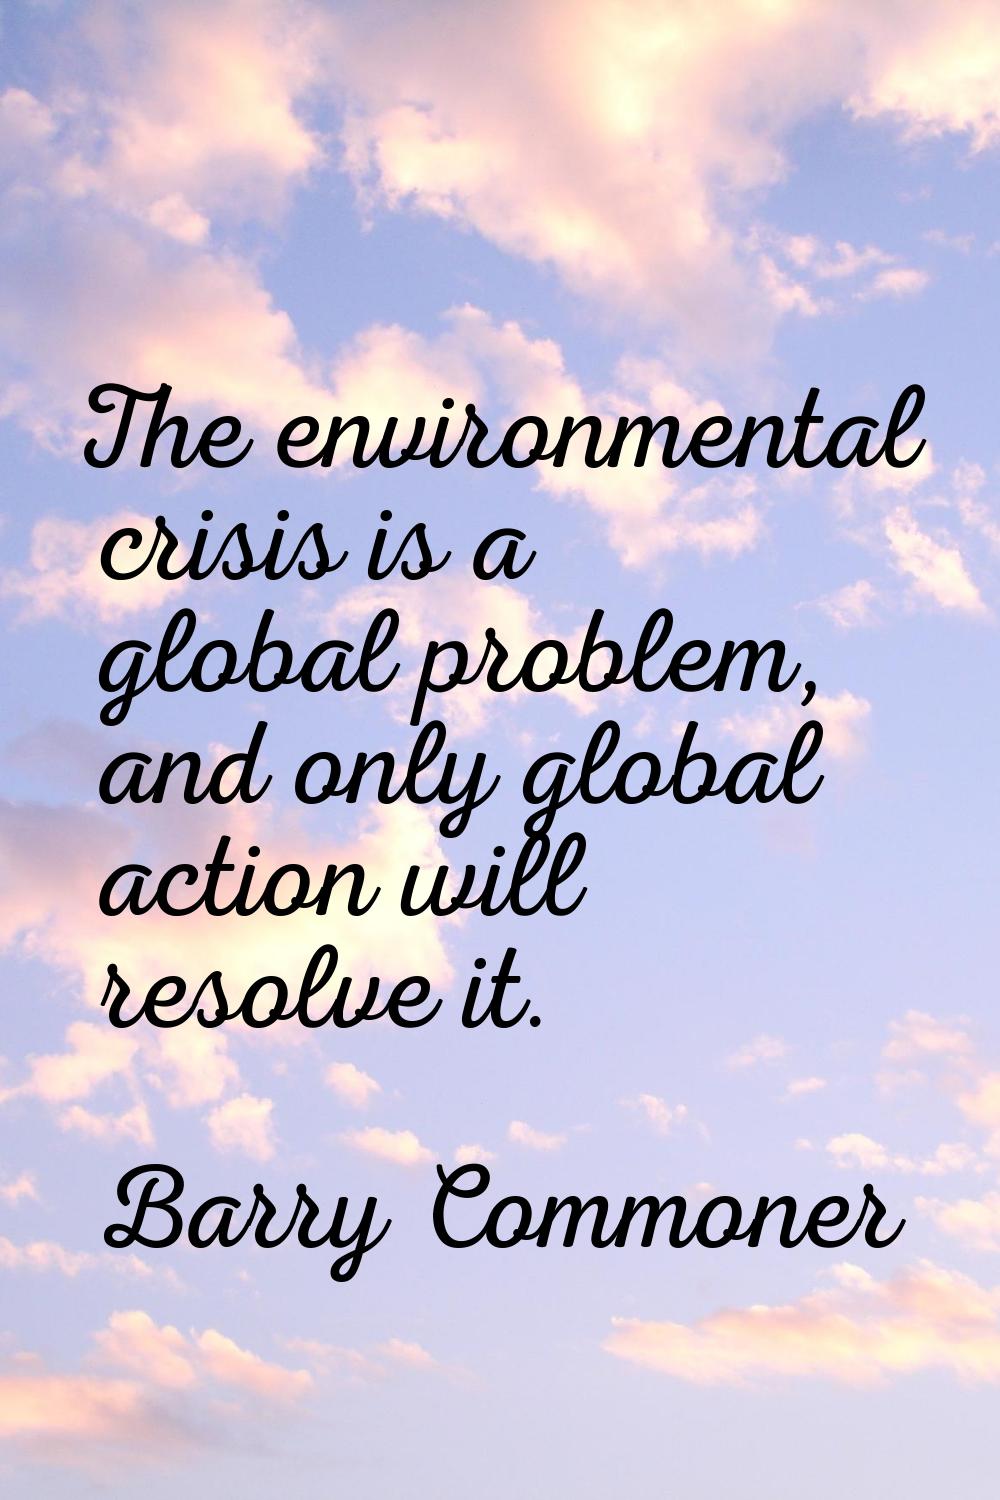 The environmental crisis is a global problem, and only global action will resolve it.